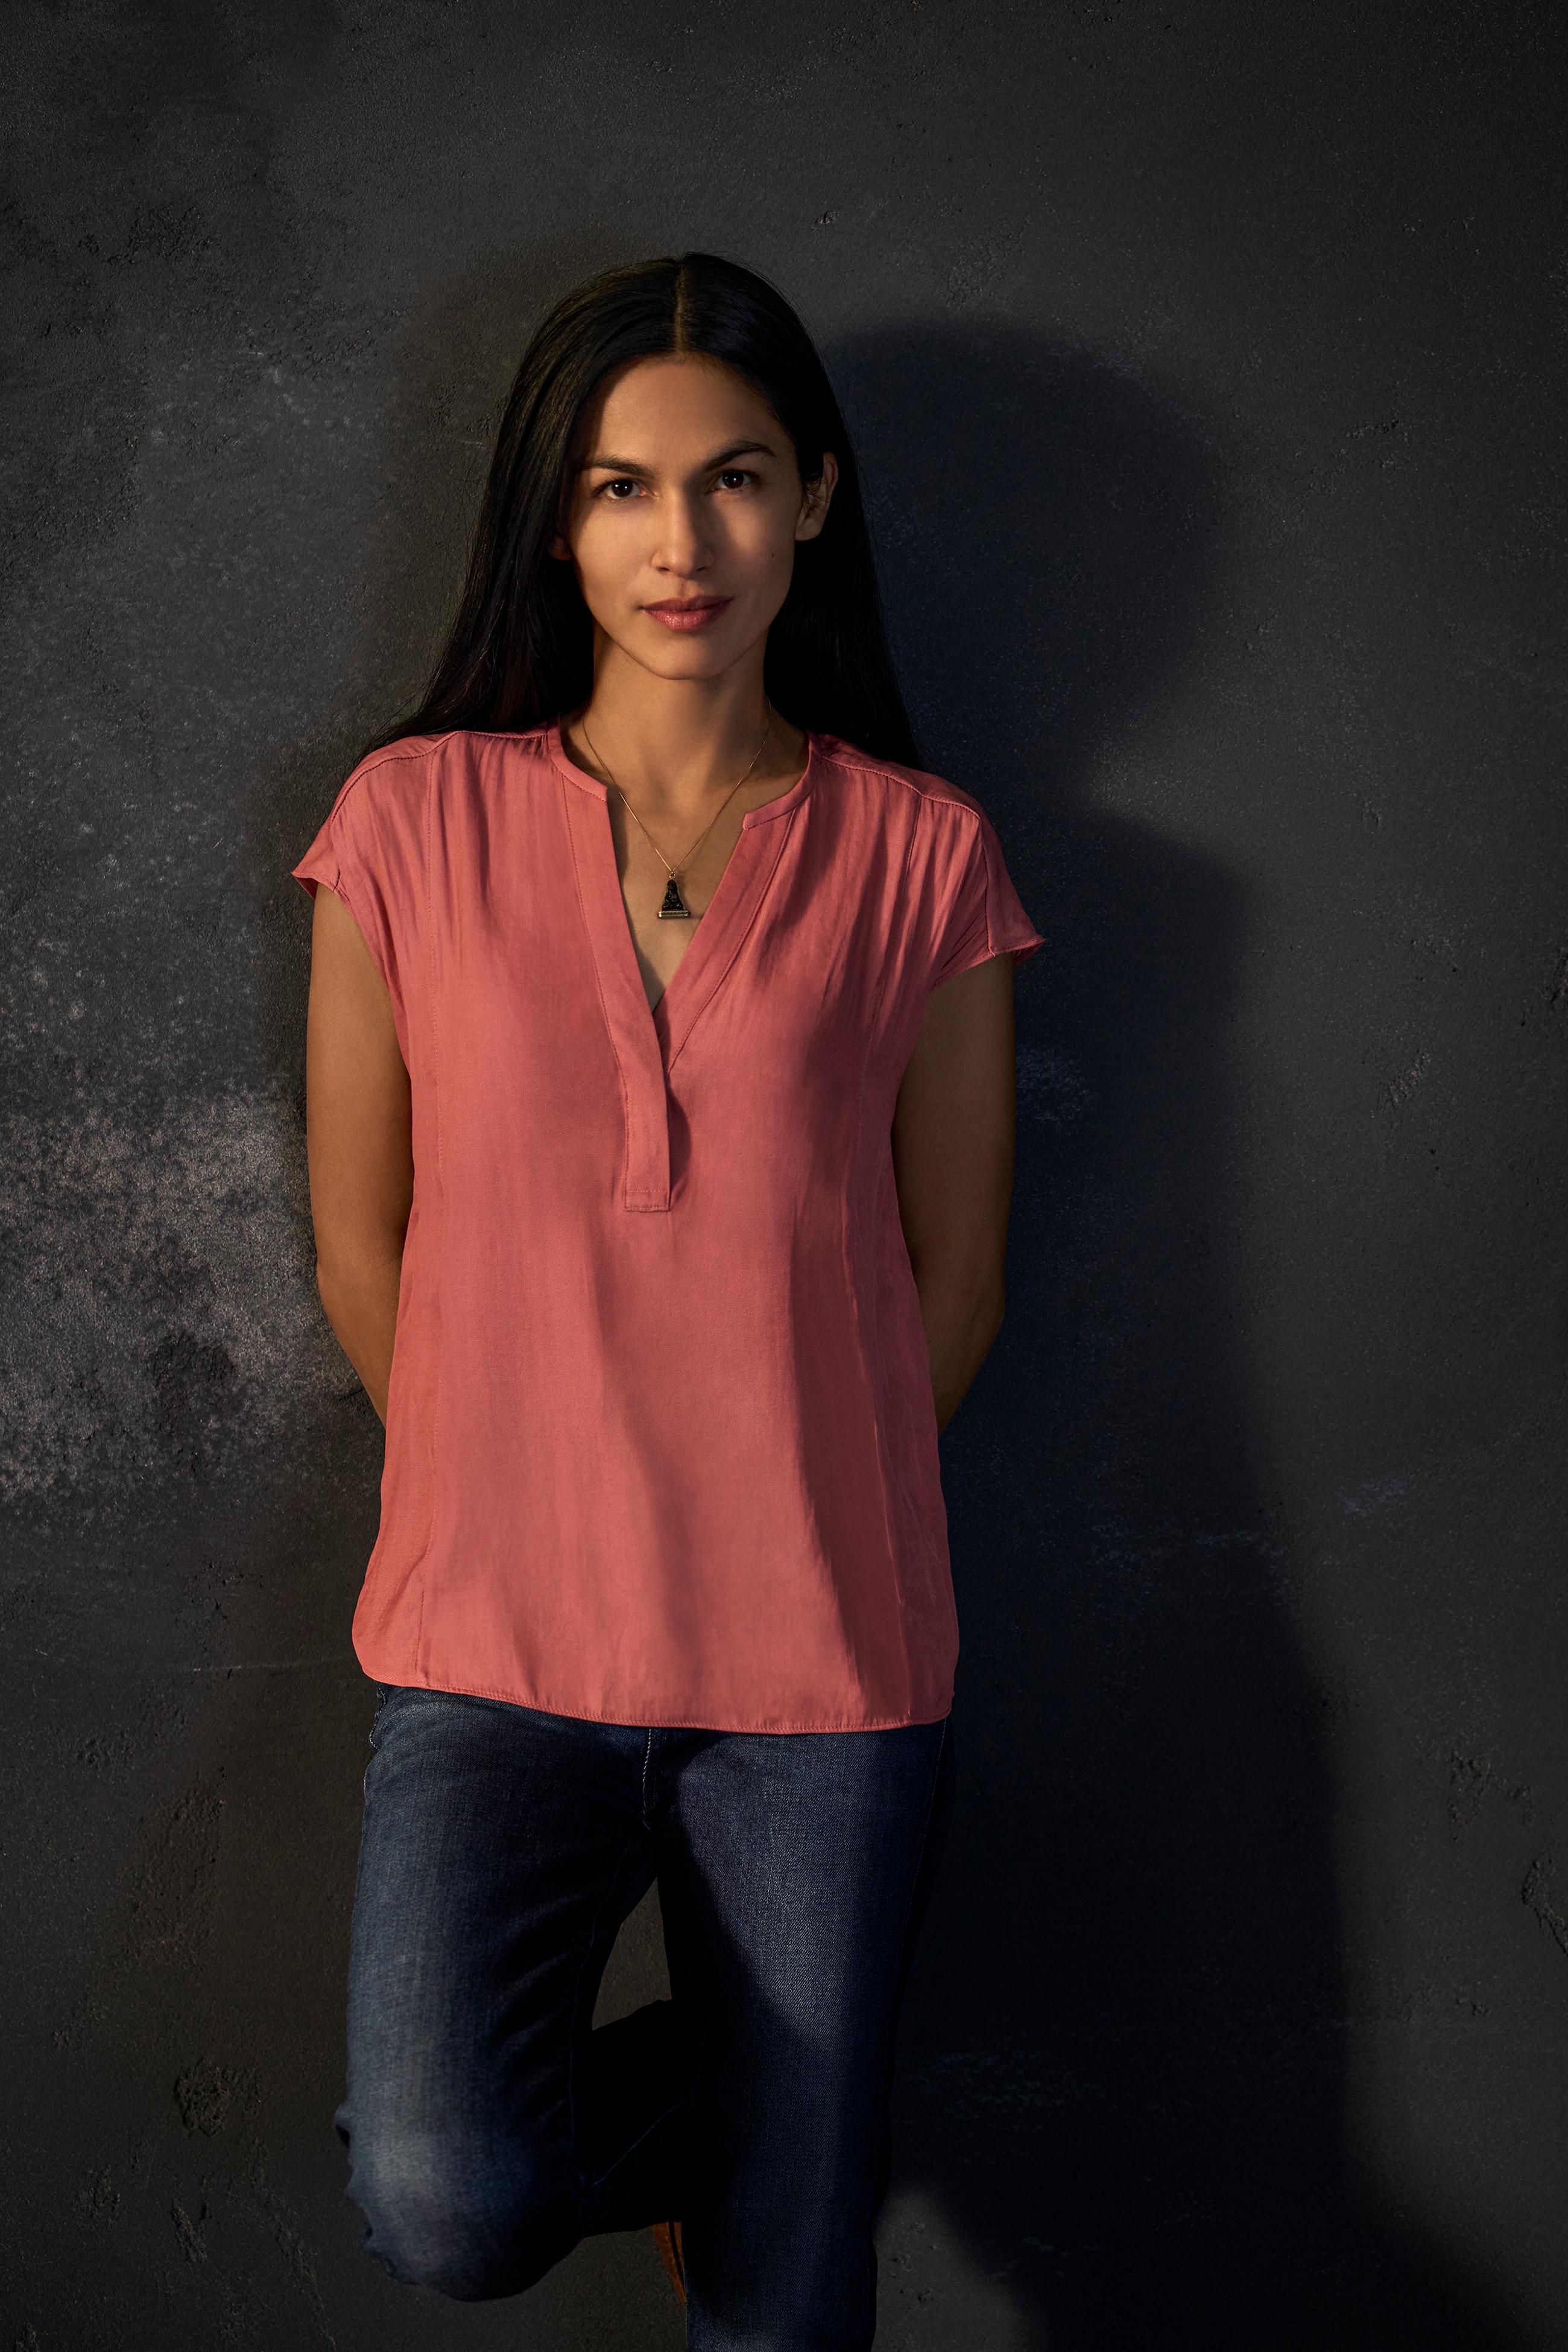 Elodie Yung. Photo courtesy: Fox 'The Cleaning Lady'